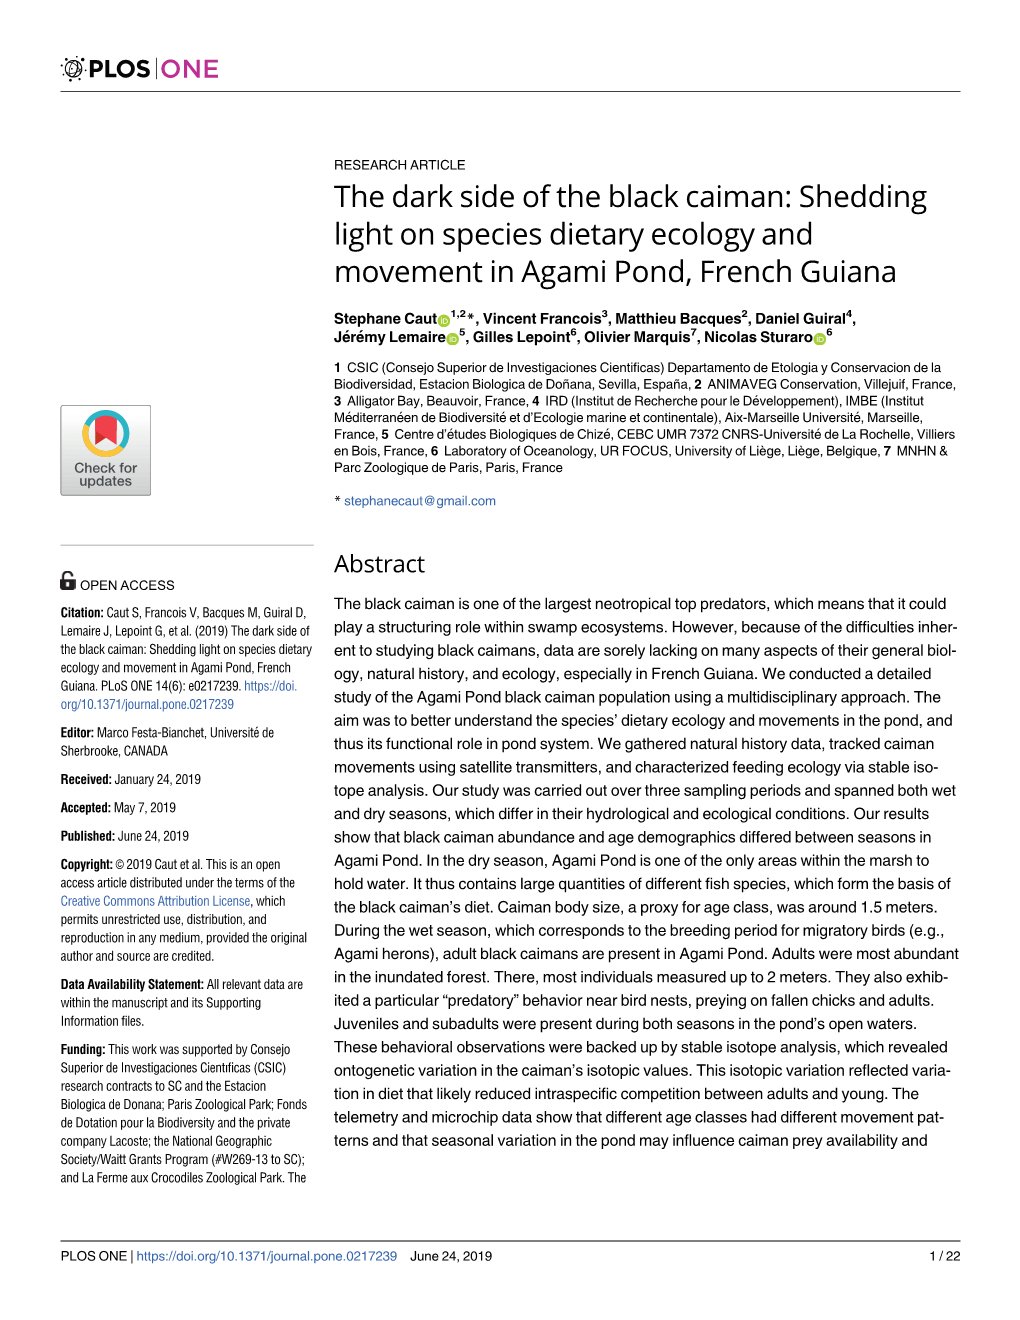 The Dark Side of the Black Caiman: Shedding Light on Species Dietary Ecology and Movement in Agami Pond, French Guiana